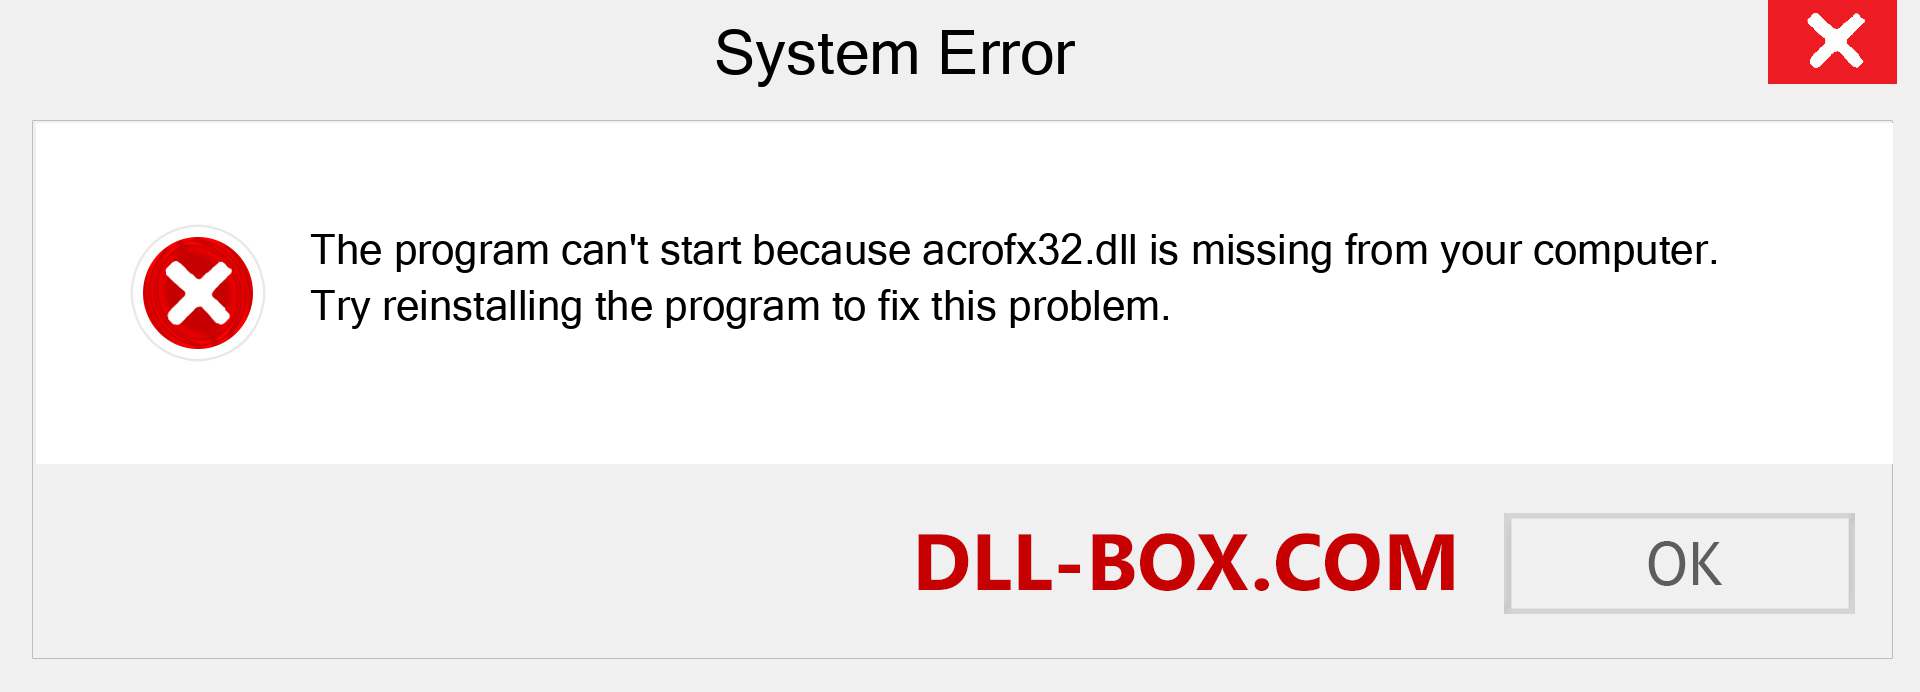  acrofx32.dll file is missing?. Download for Windows 7, 8, 10 - Fix  acrofx32 dll Missing Error on Windows, photos, images